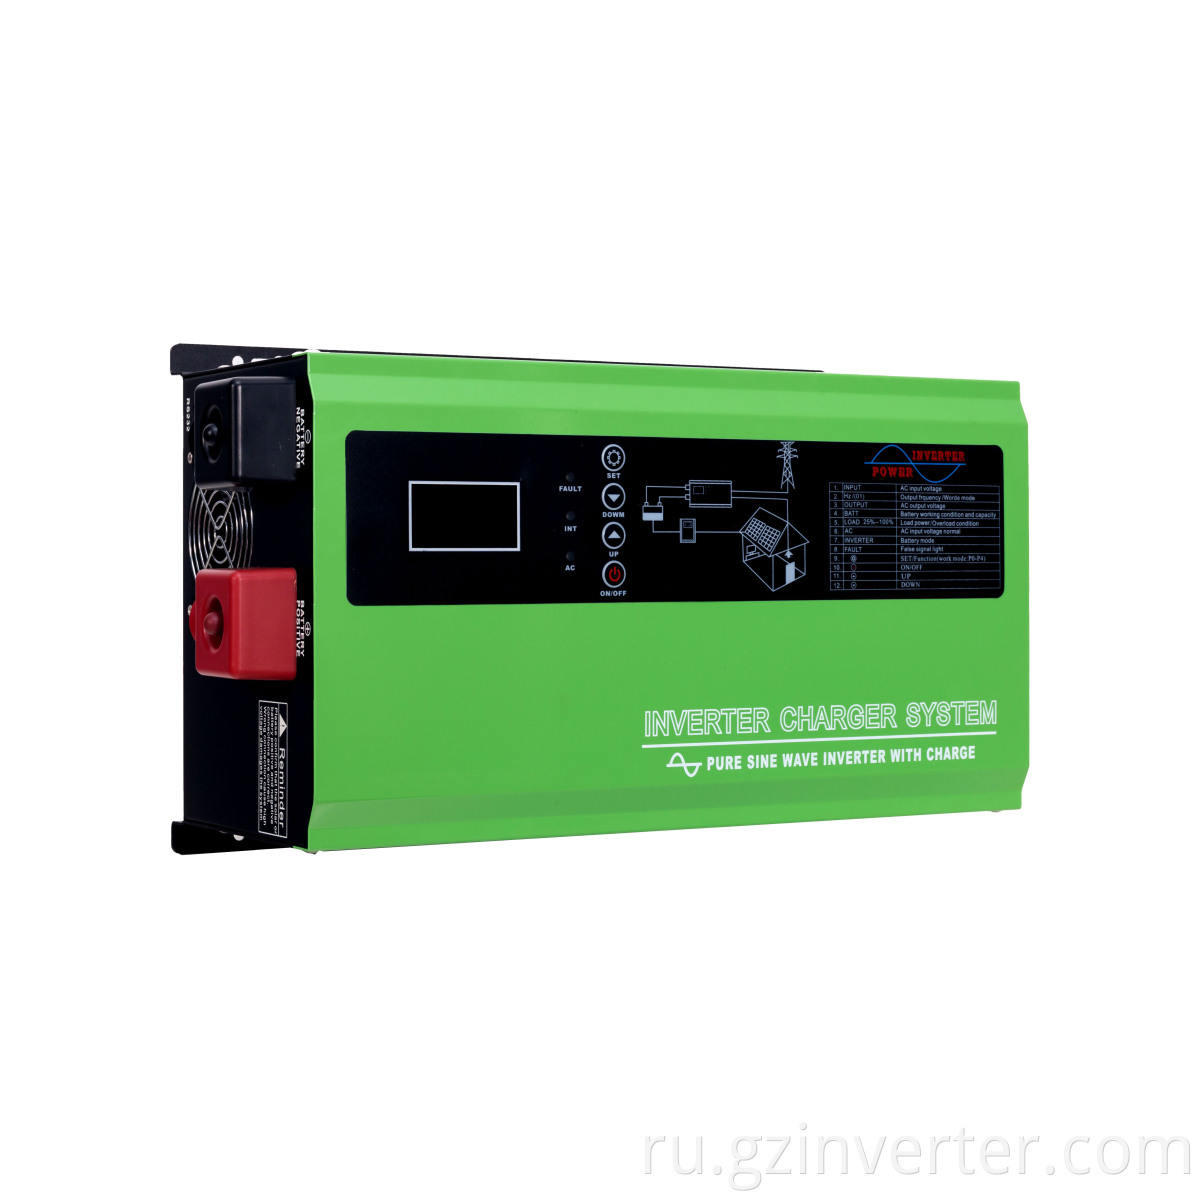 Low frequency inverter with controller